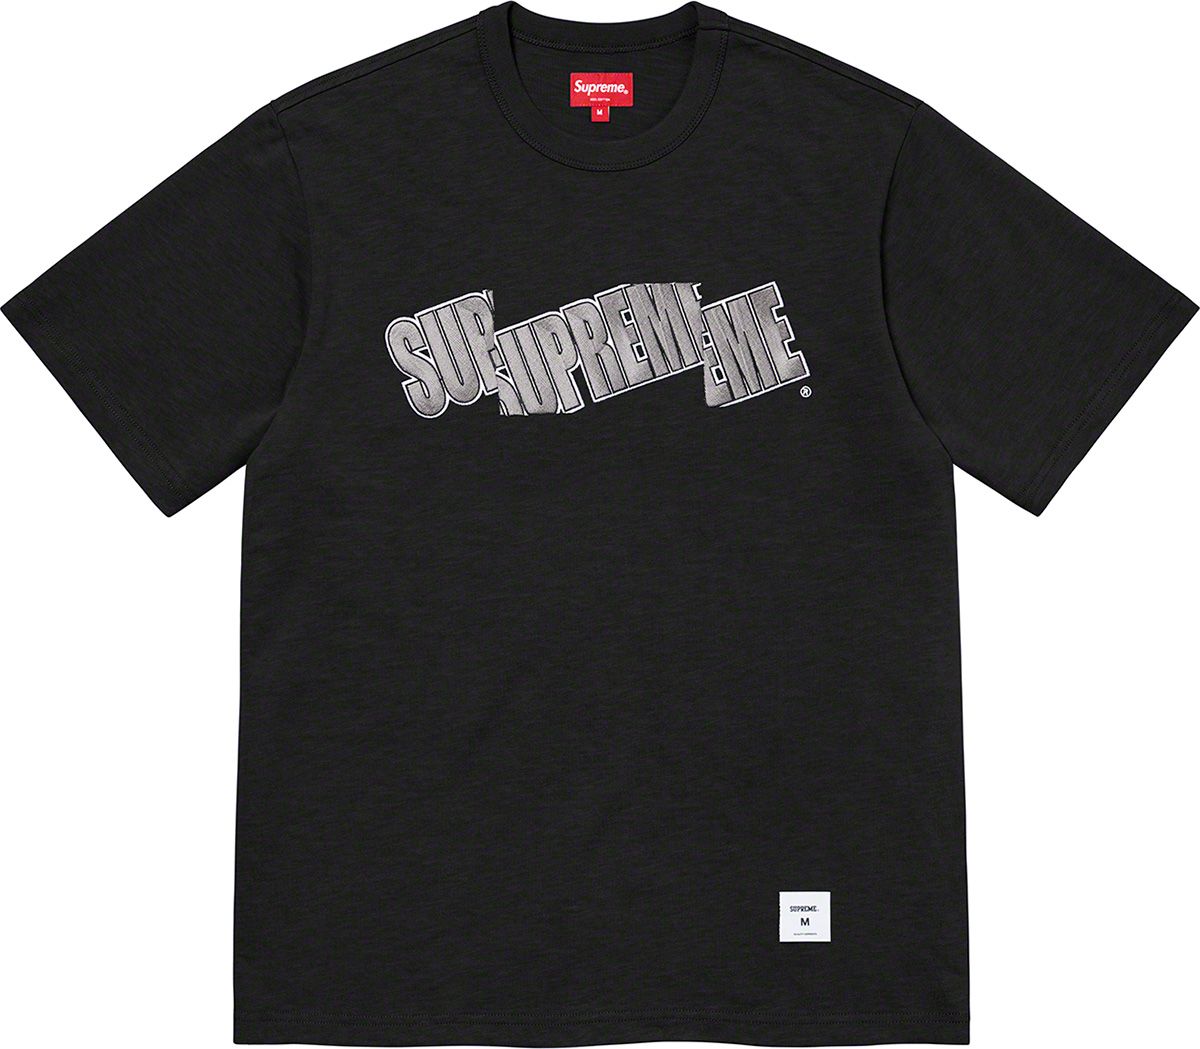 Thin Stripe L/S Top - Spring/Summer 2021 Preview – Supreme